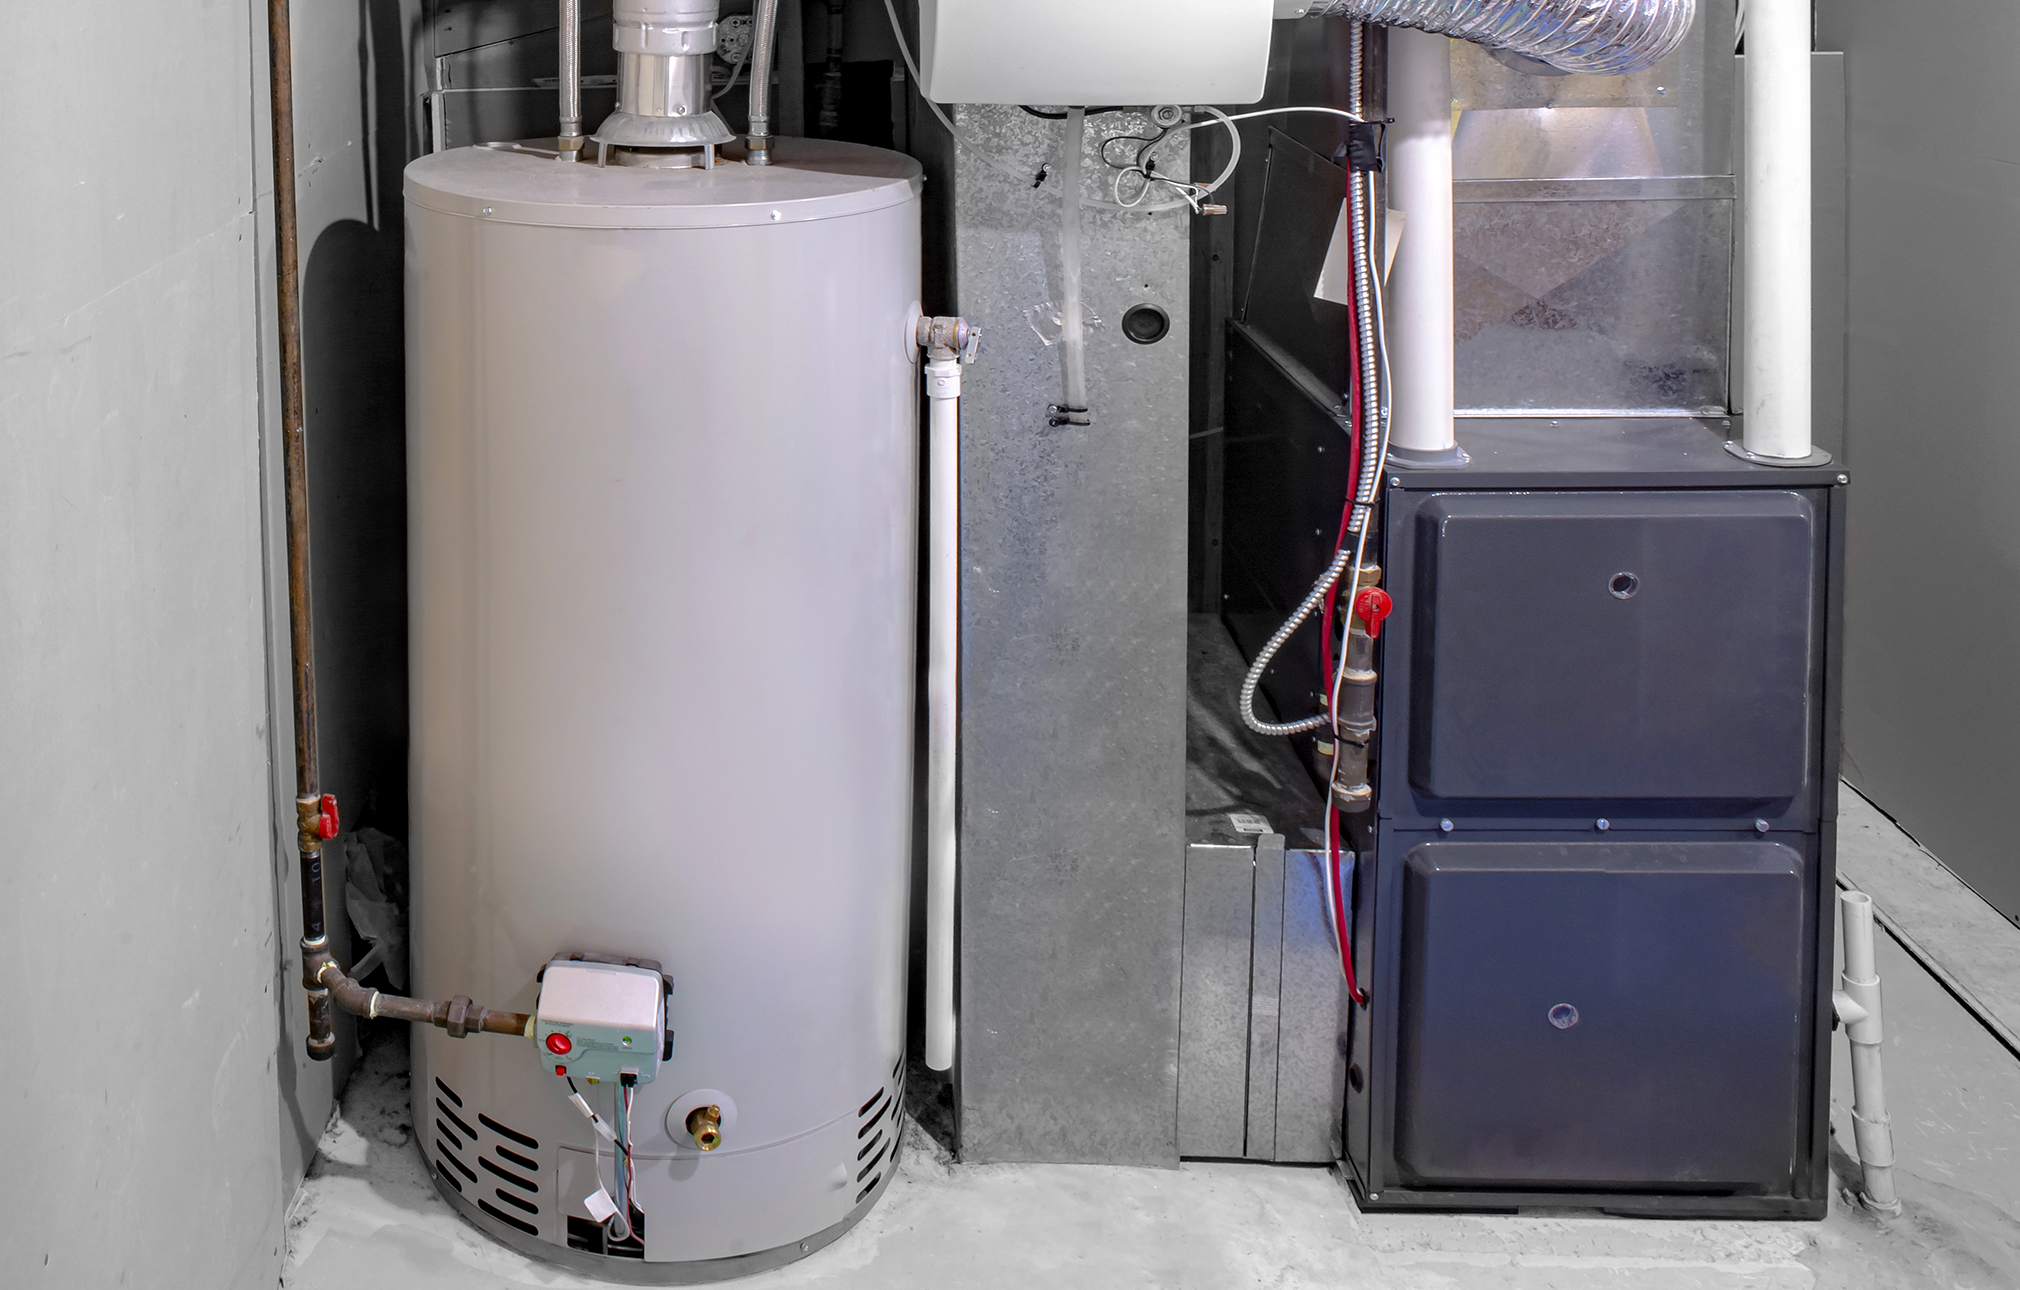 Gas Vs. Electric Furnaces: What Are the Differences?